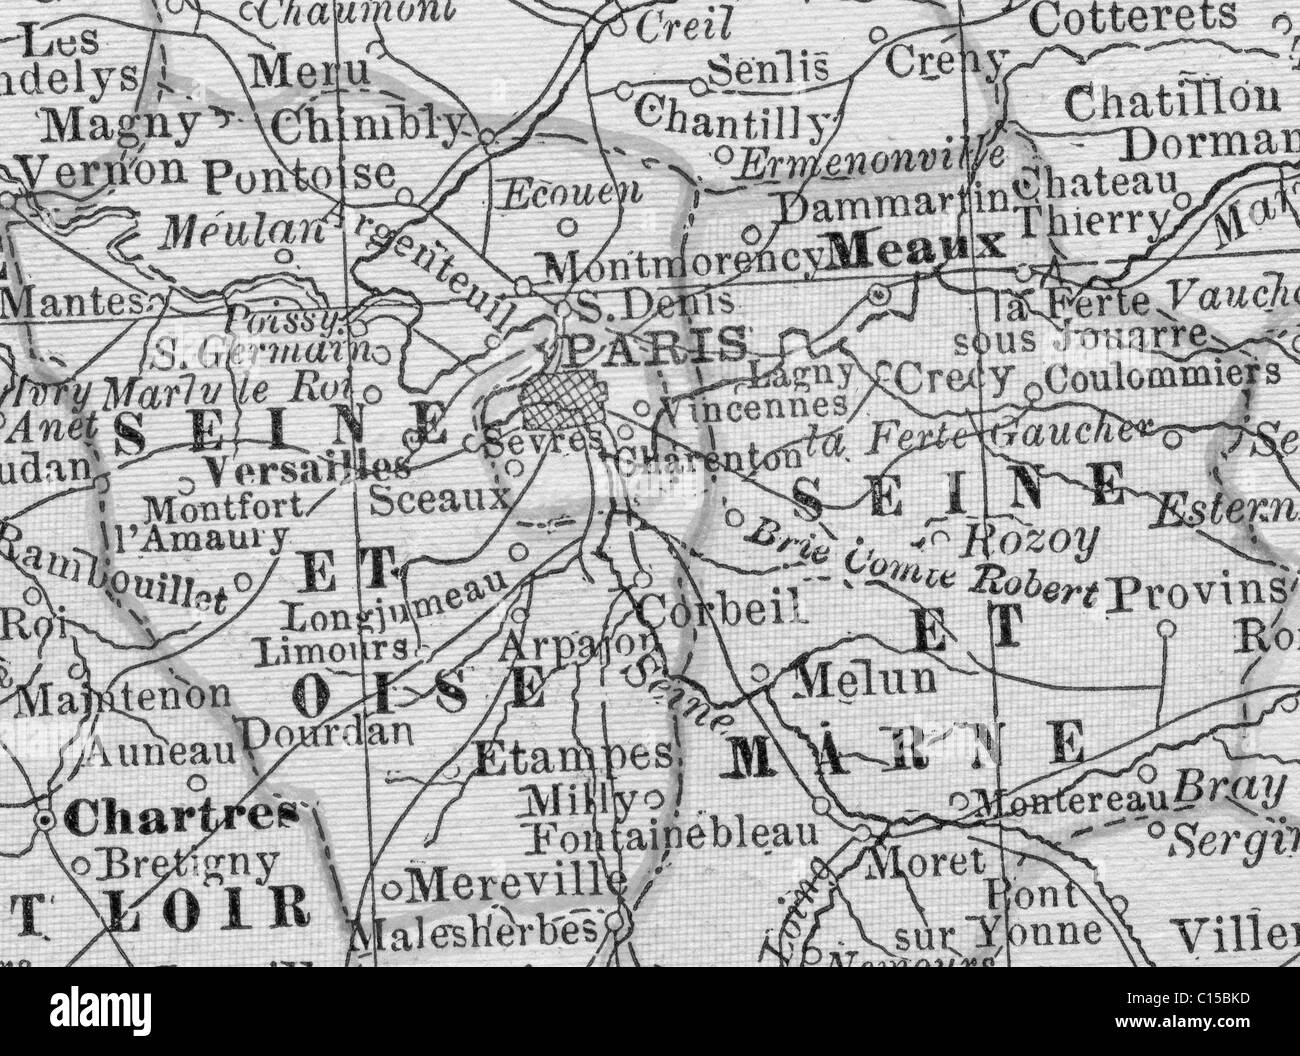 Old map of Paris region from original geography textbook, 1884 Stock Photo